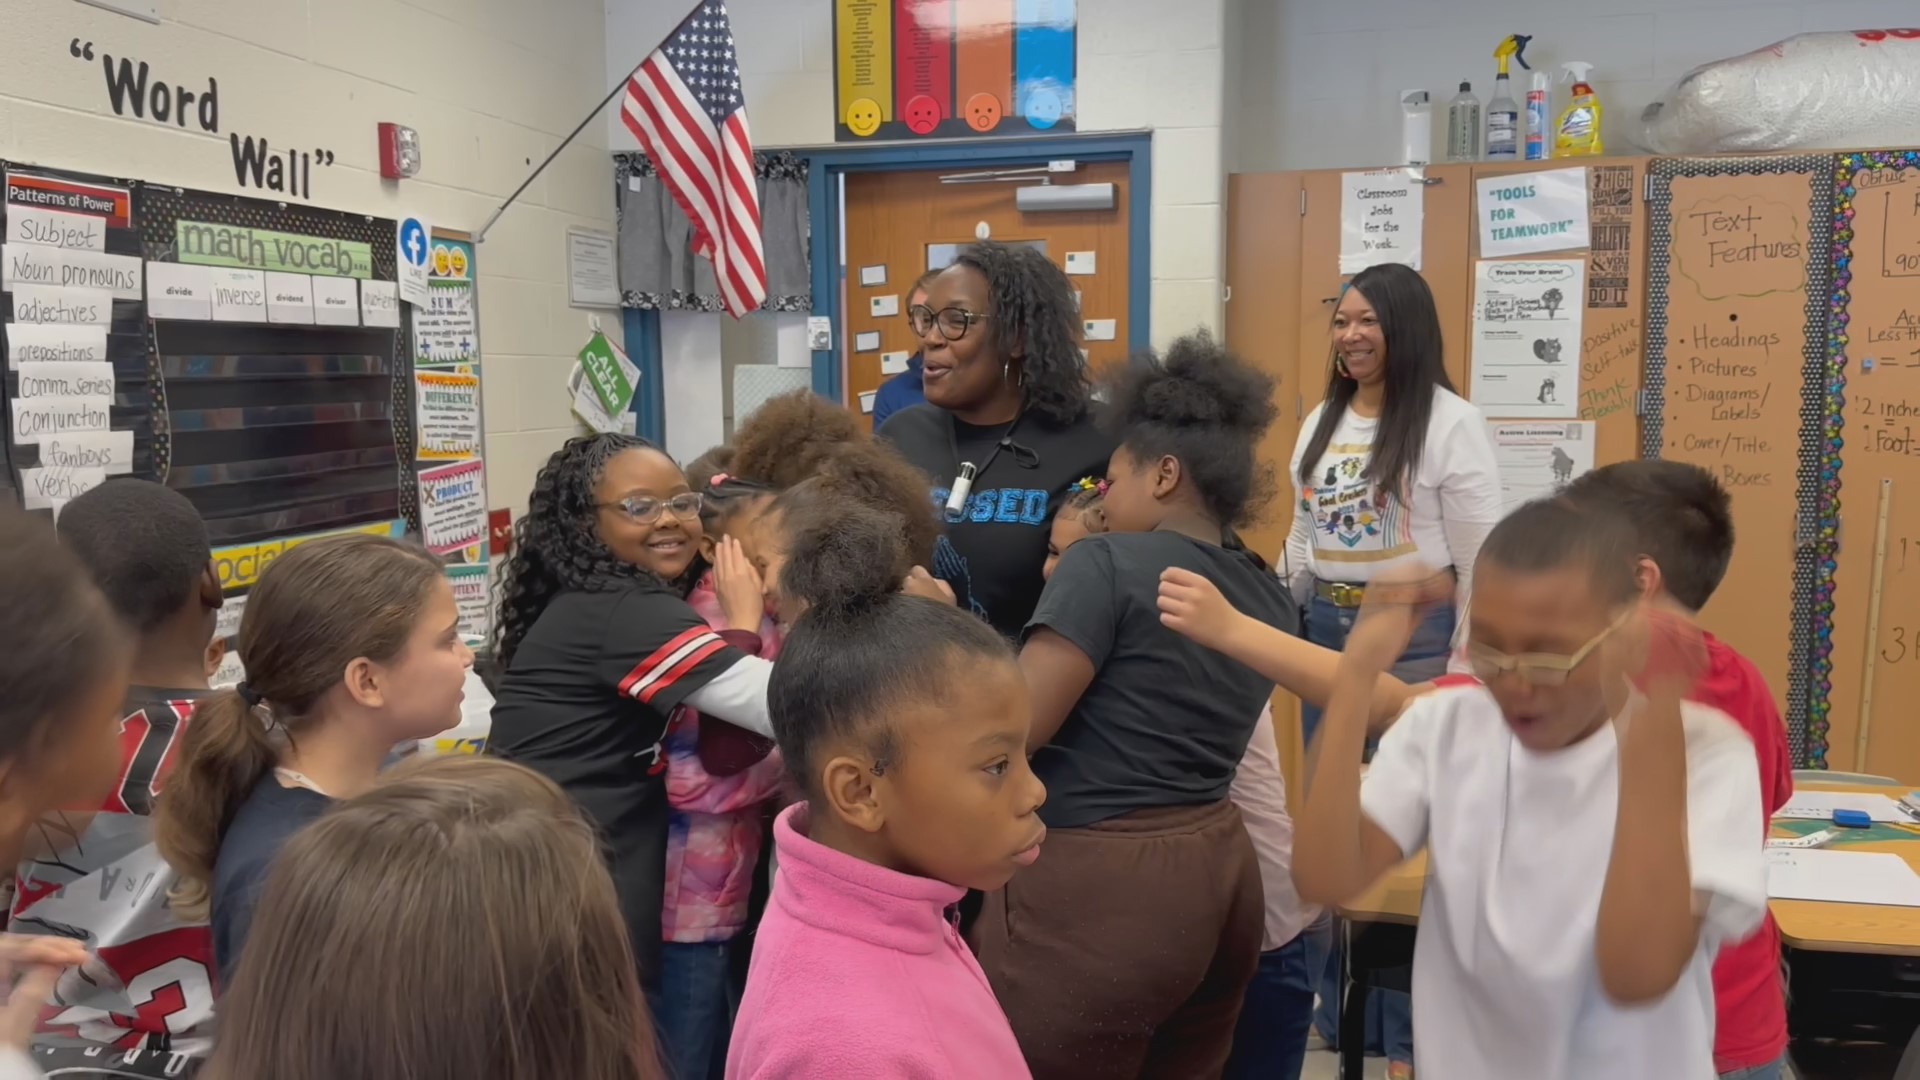 This next Teacher of the Week from Oakview Elementary in Muskegon was visibly shaken after our surprise, but her students gathered around her in support.